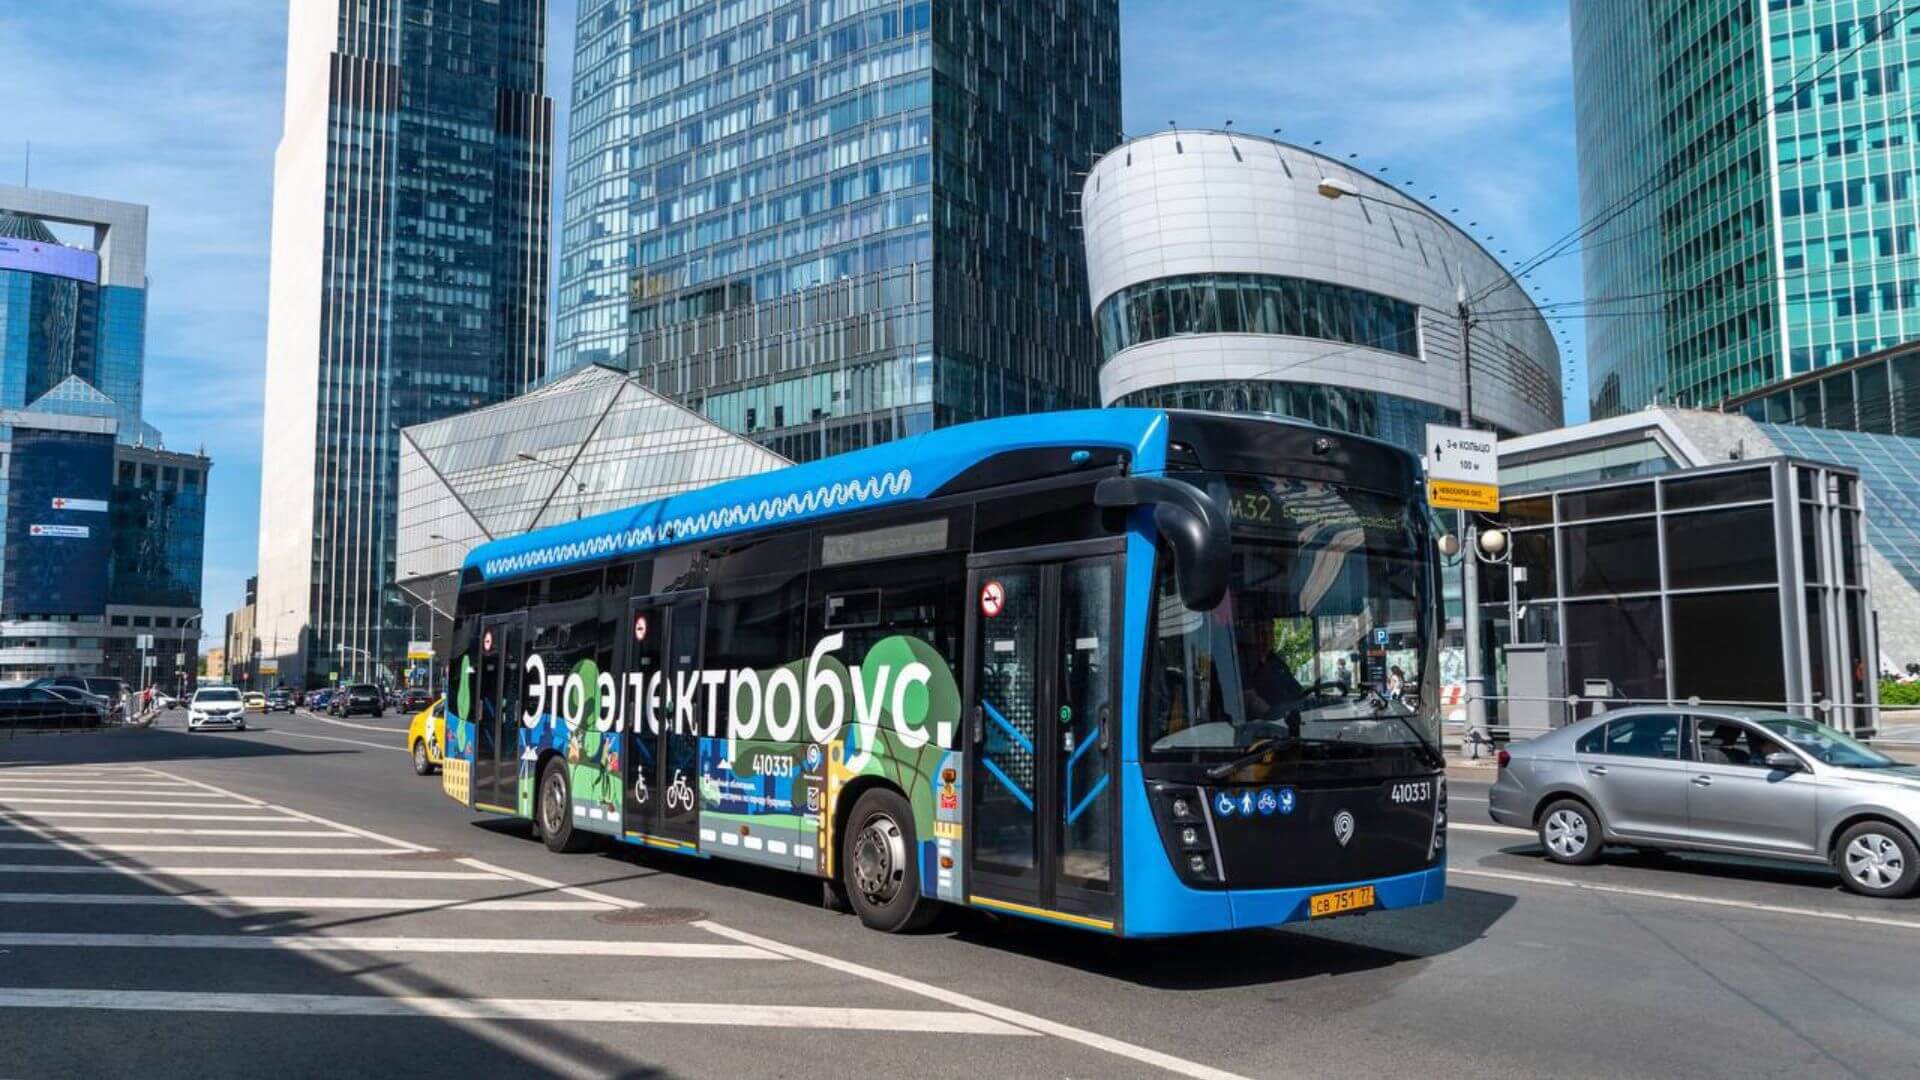 https://e-vehicleinfo.com/moscow-electric-buses-transported-140-lakhs-people-in-6-months/